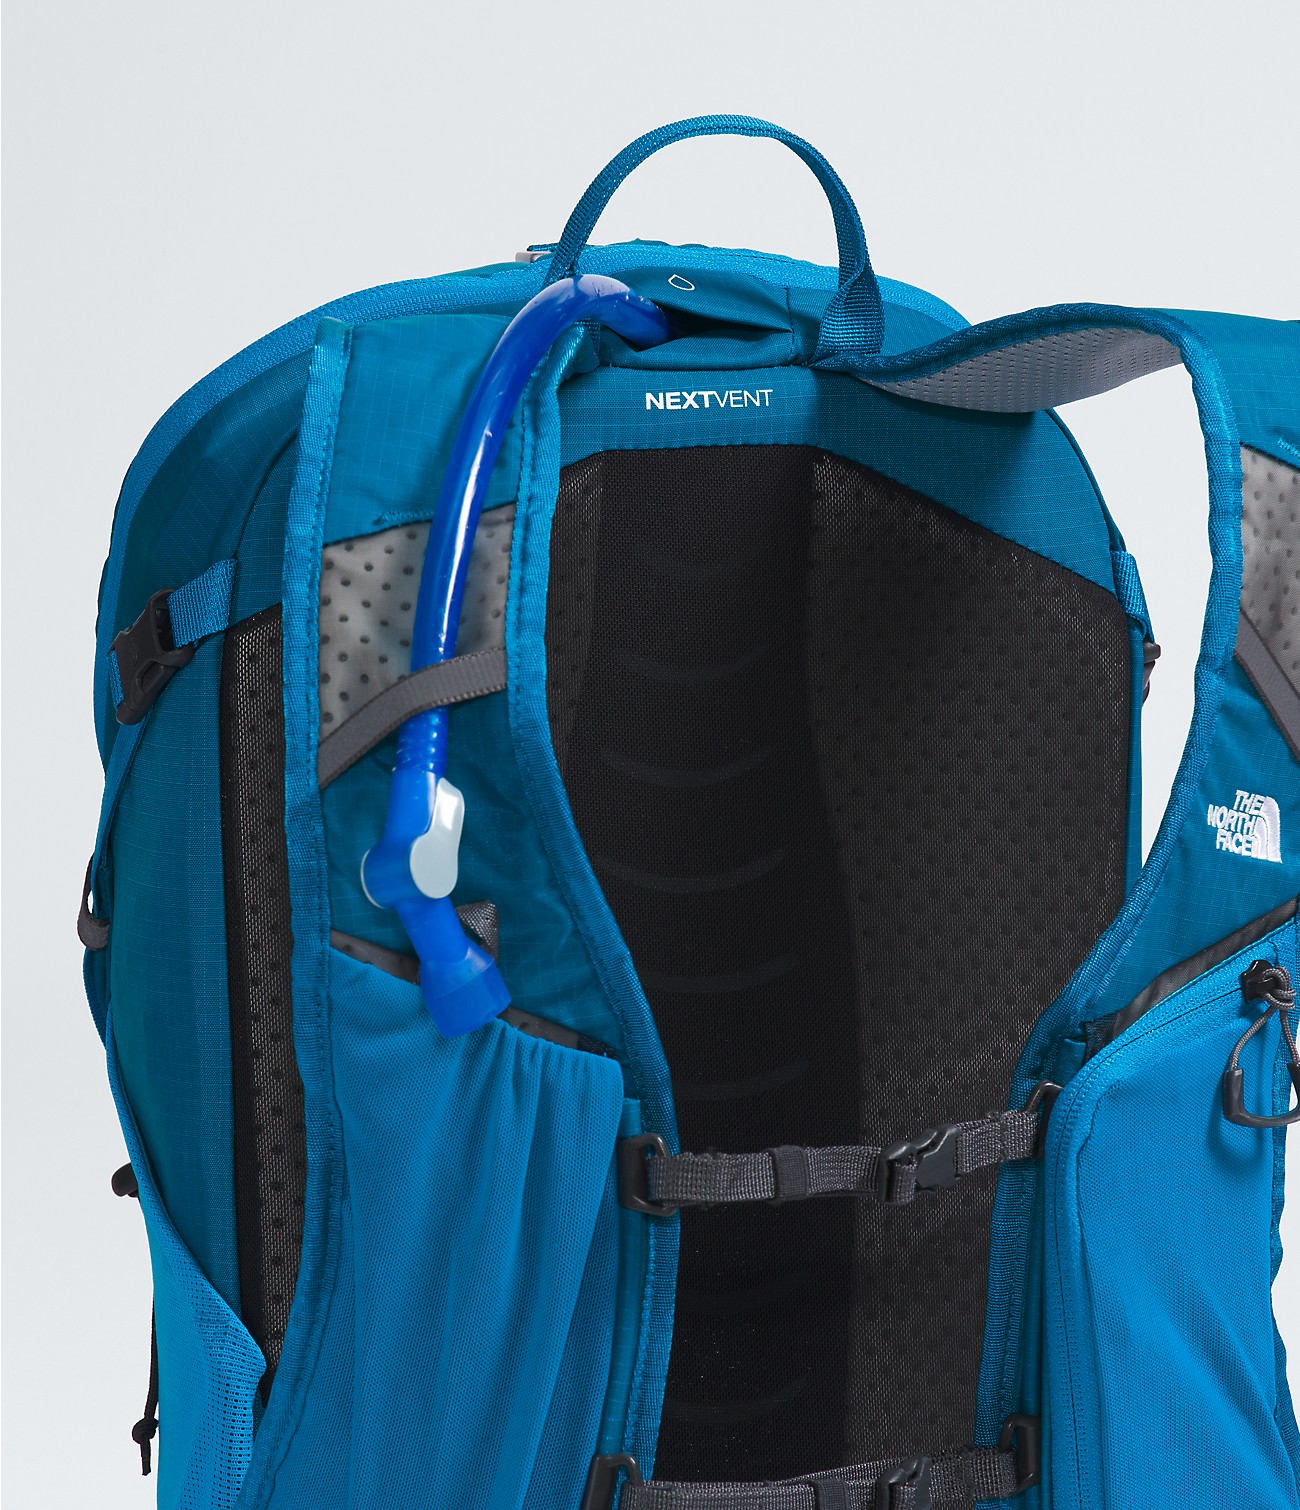 Trail Lite Speed 20 Backpack | The North Face